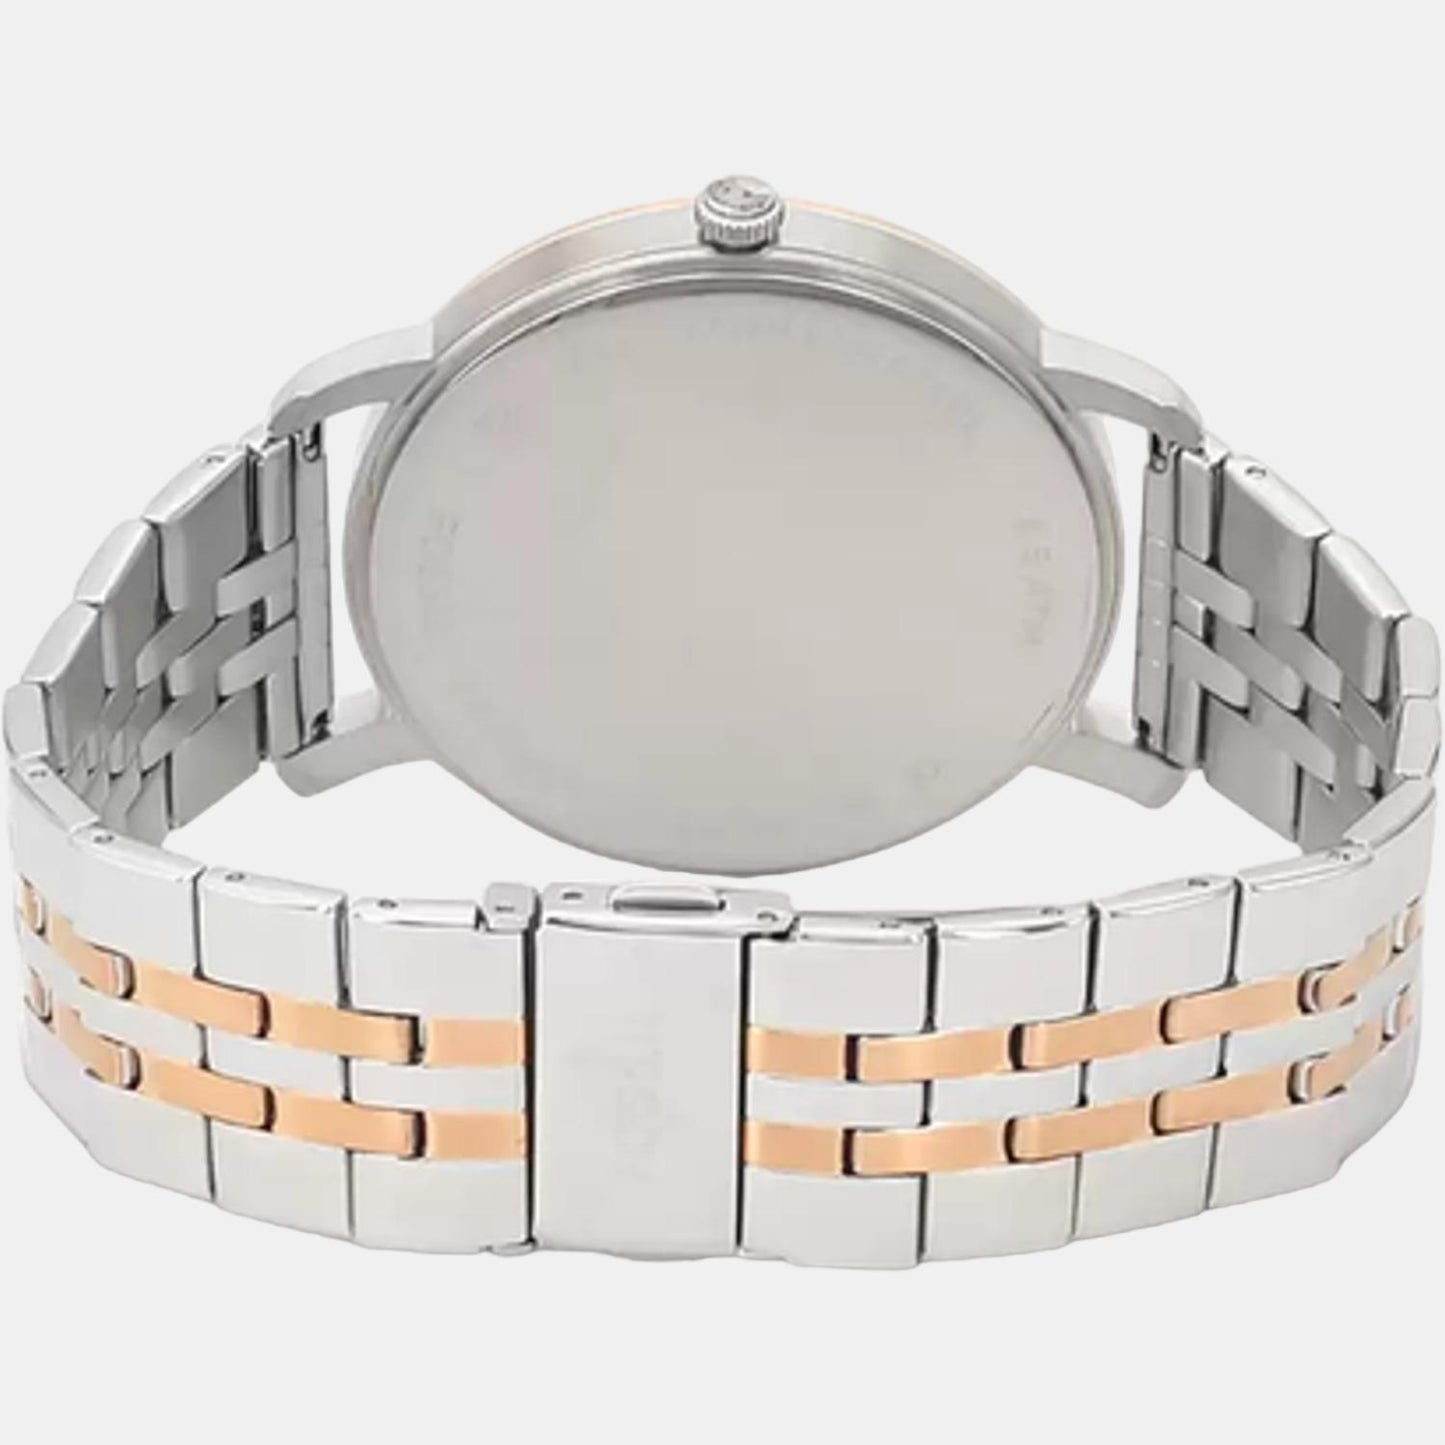 Male Silver Analog Stainless Steel Watch BQ2417